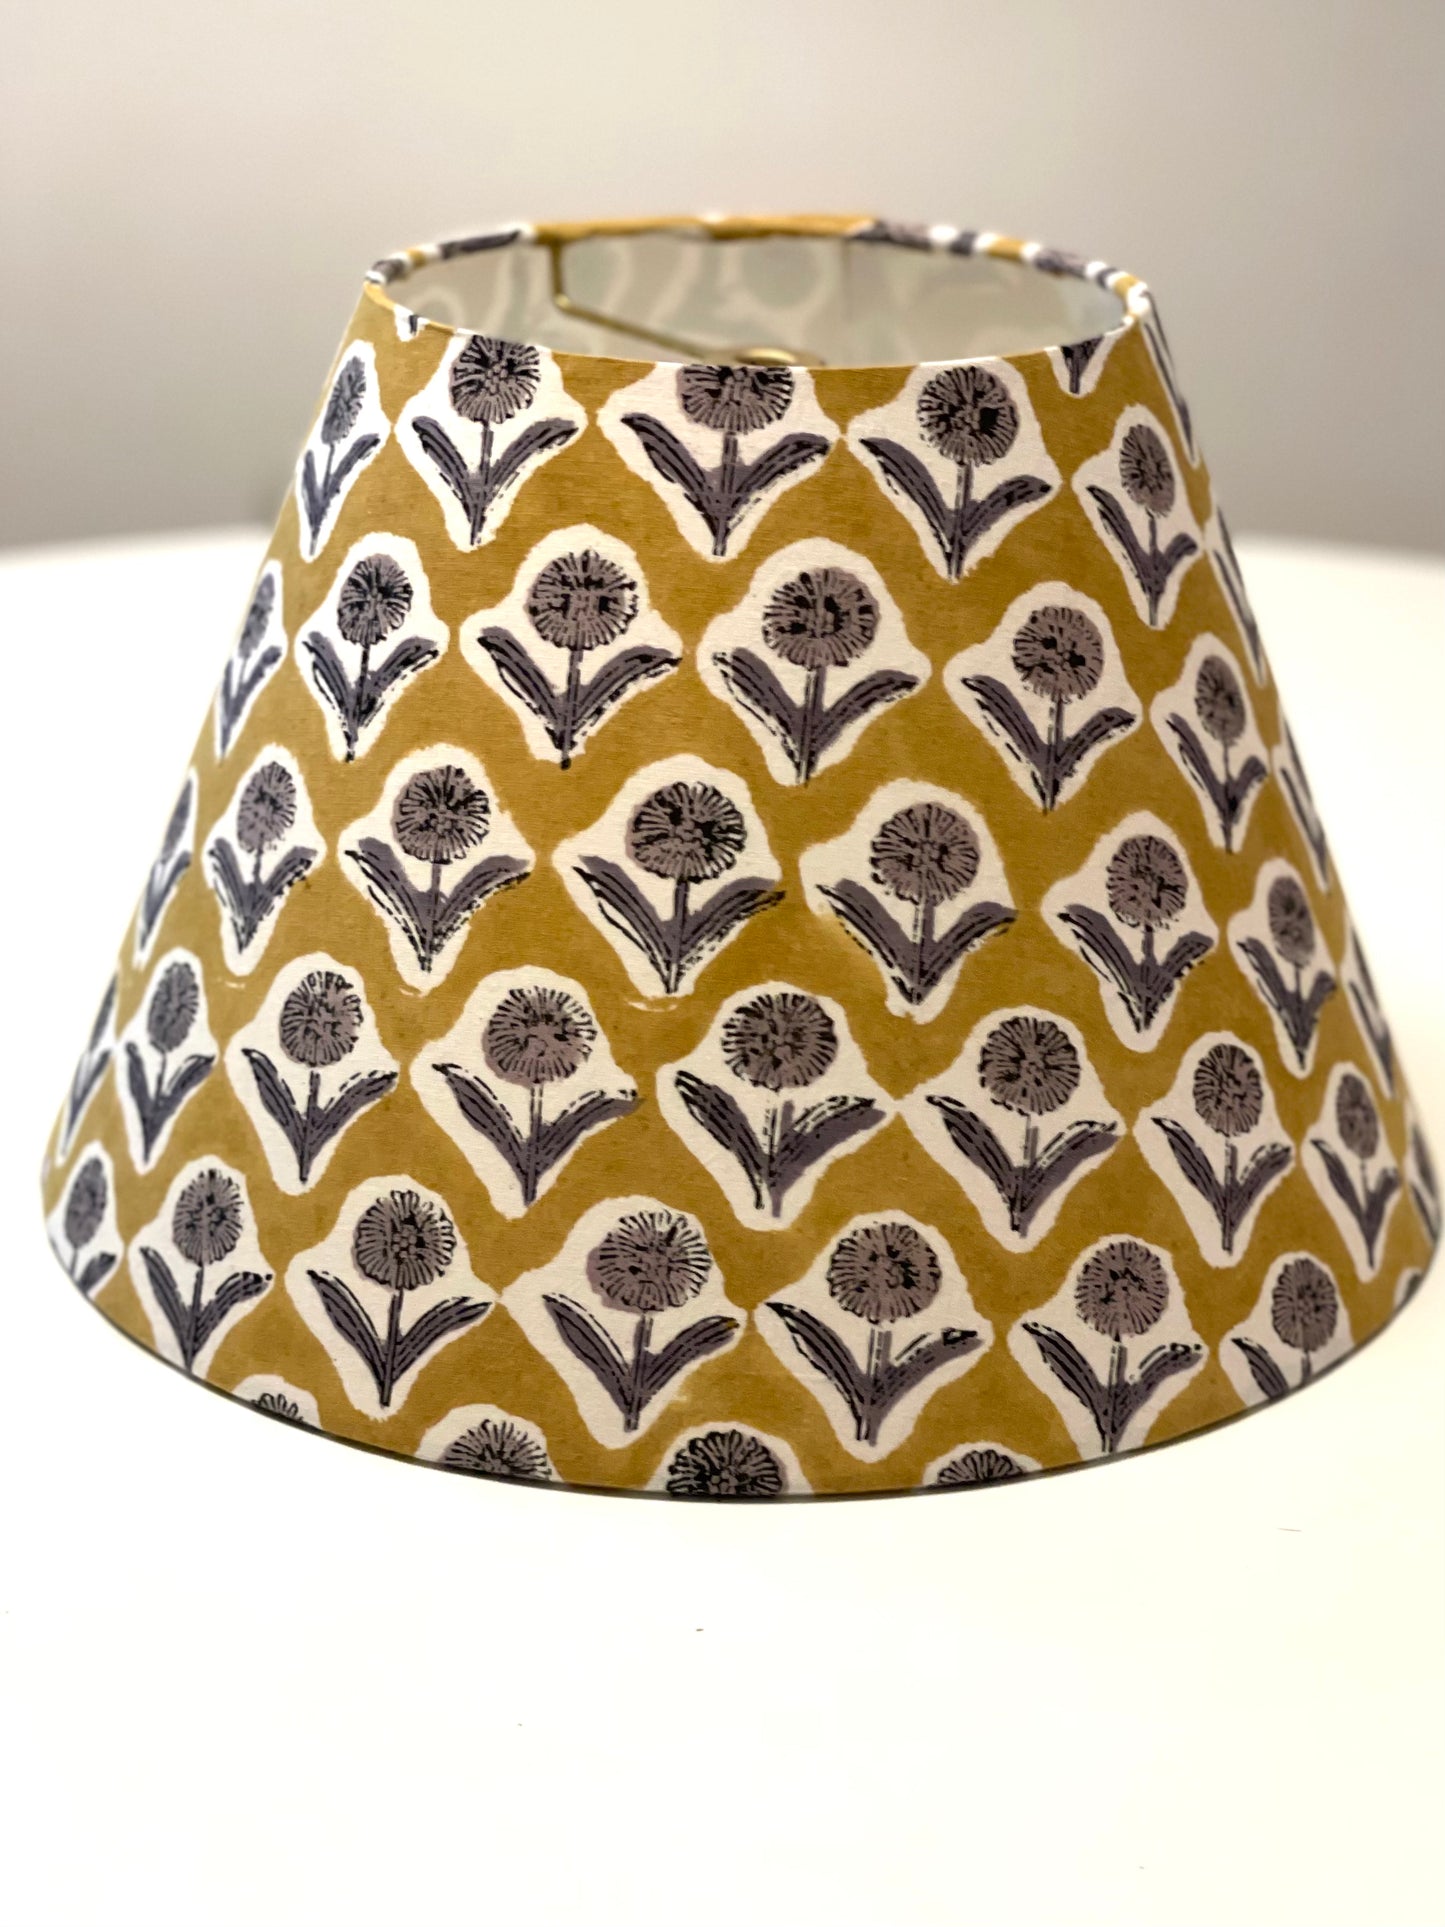 Small Conical Lampshade. Indian Block print from Jaipur. Harvest Gold with Black and Gray Floral Motif.